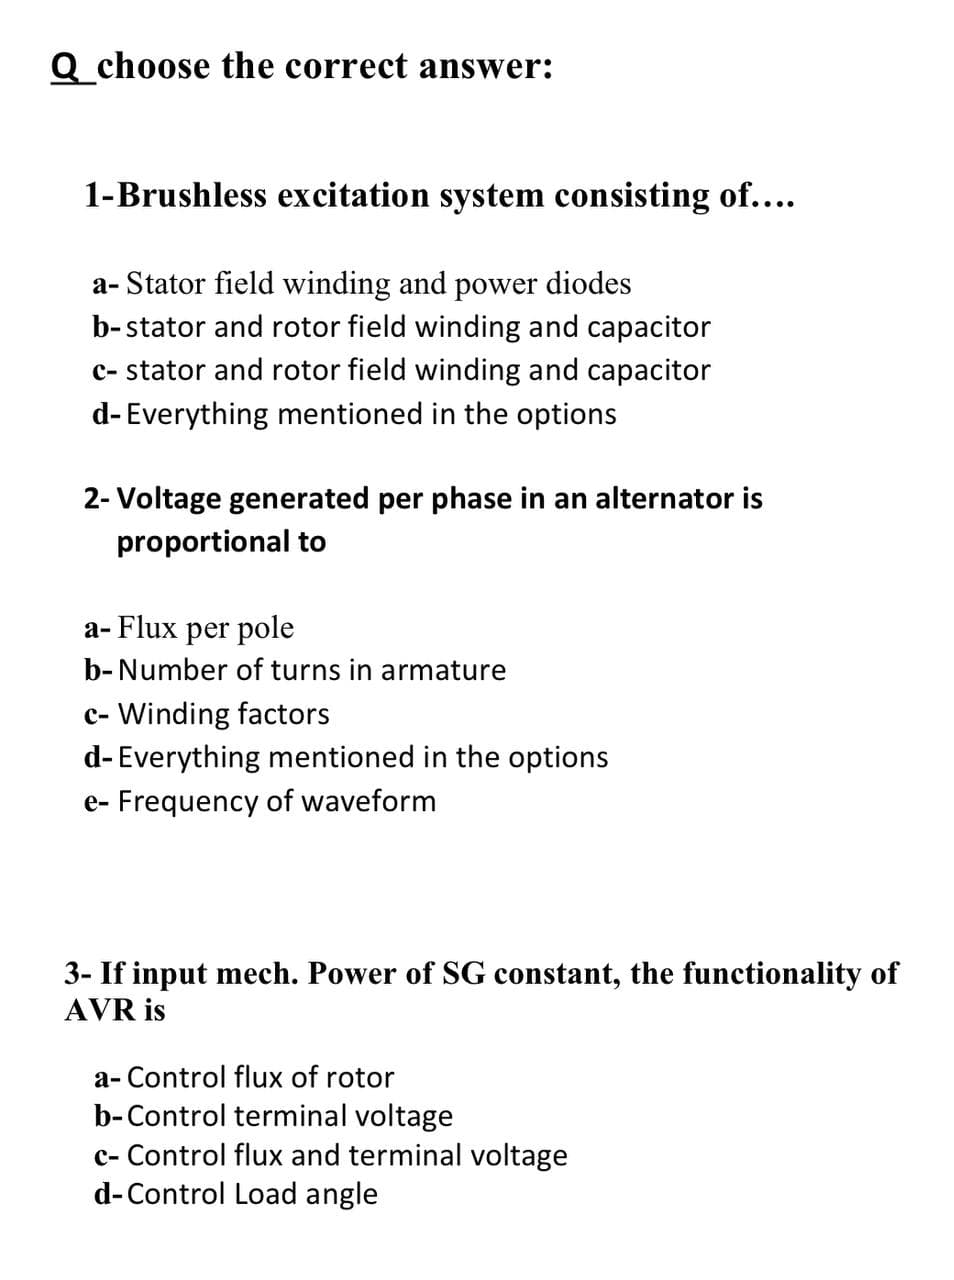 Q choose the correct answer:
1-Brushless excitation system consisting of....
a- Stator field winding and power diodes
b-stator and rotor field winding and capacitor
c- stator and rotor field winding and capacitor
d- Everything mentioned in the options
2- Voltage generated per phase in an alternator is
proportional to
a- Flux per pole
b- Number of turns in armature
c-Winding factors
d- Everything mentioned in the options
e- Frequency of waveform
3- If input mech. Power of SG constant, the functionality of
AVR is
a- Control flux of rotor
b-Control terminal voltage
c- Control flux and terminal voltage
d-Control Load angle